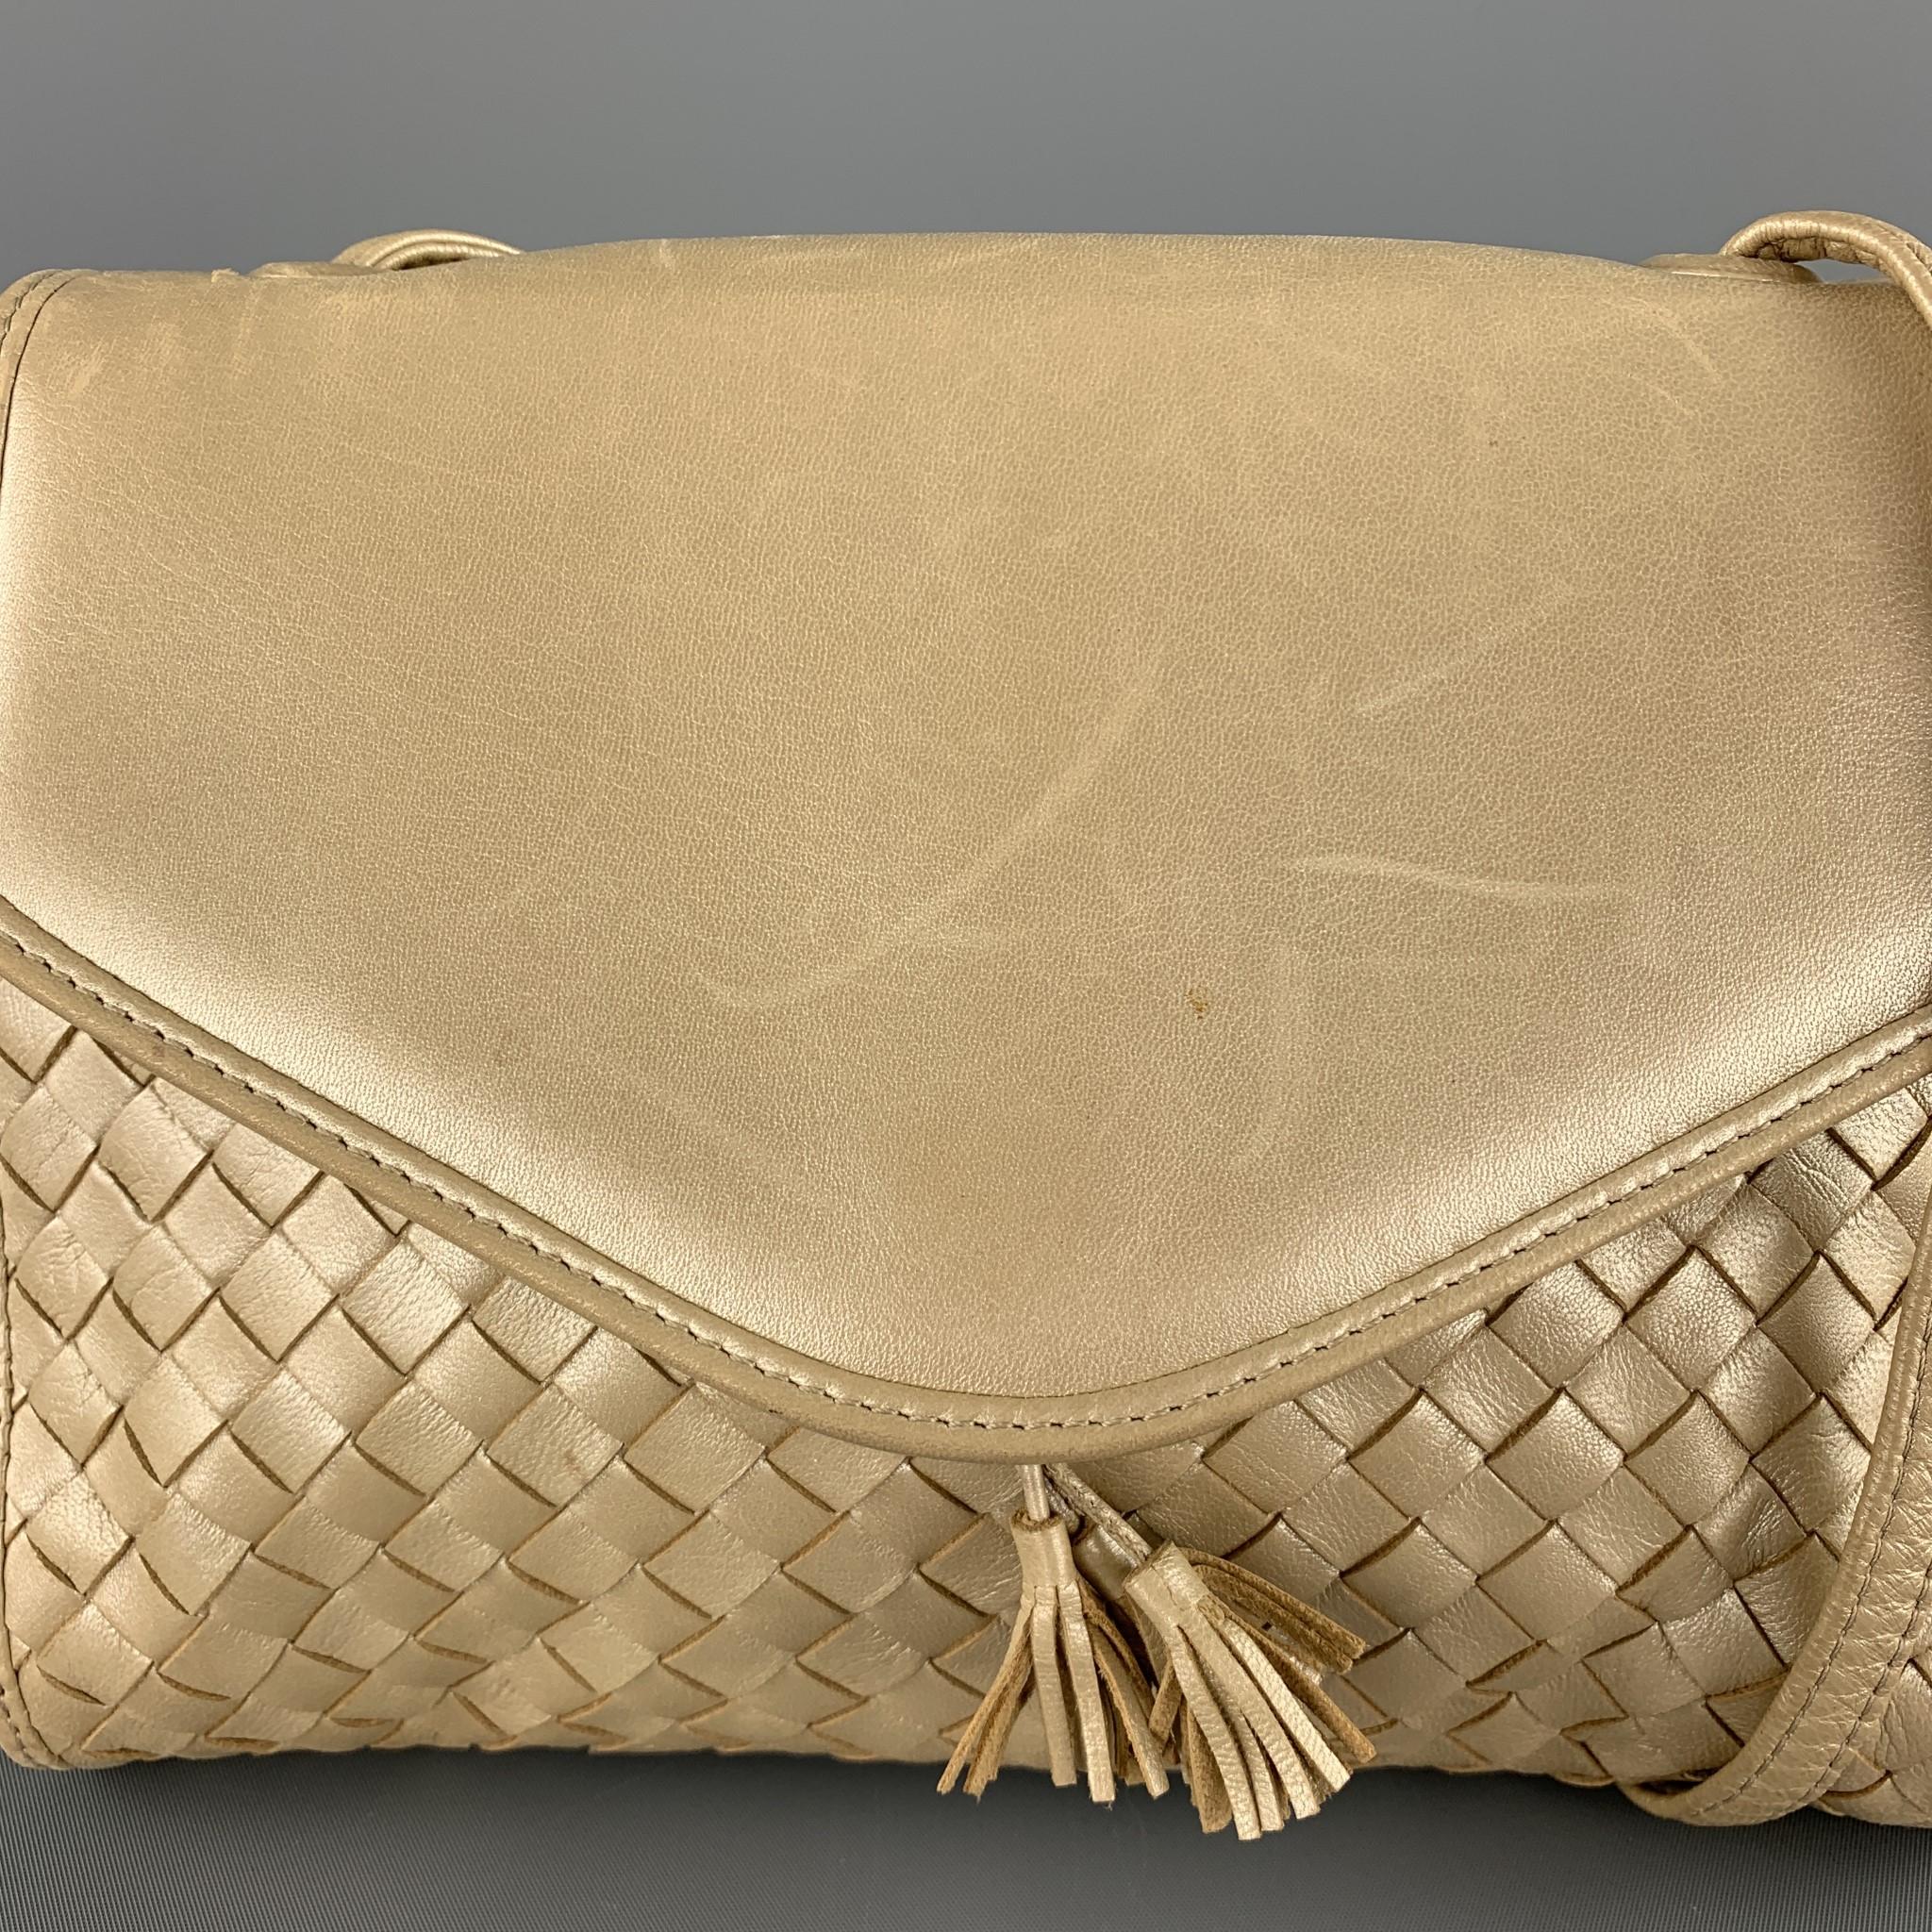 champagne leather bag